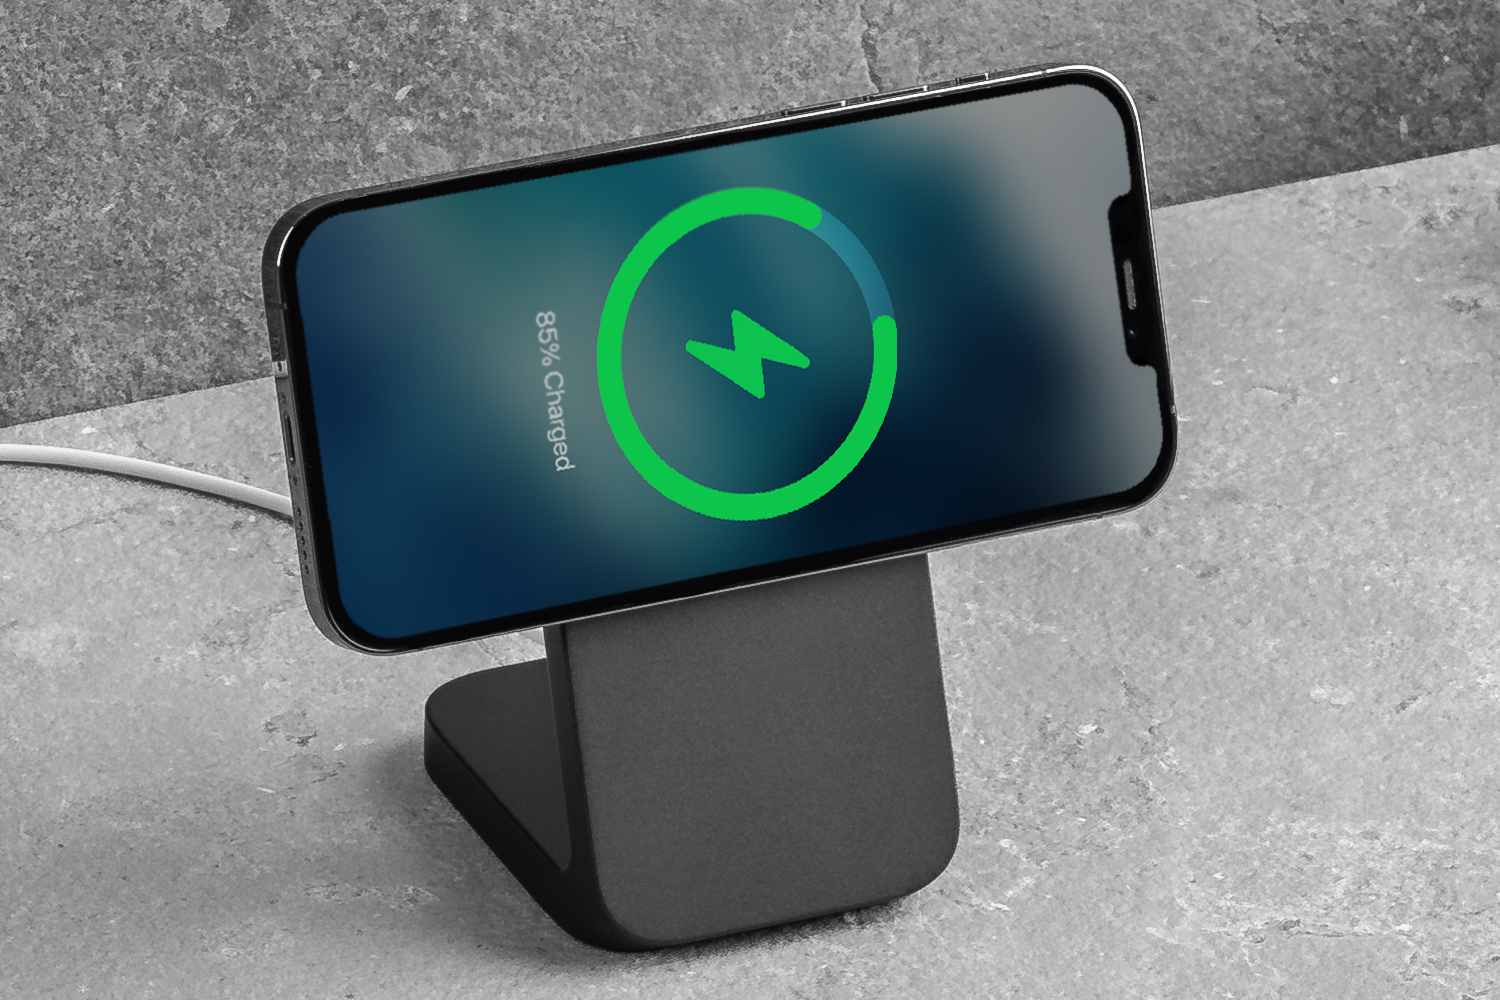 Nomad MagSafe Mount Stand with iPhone charging in landscape orientation.